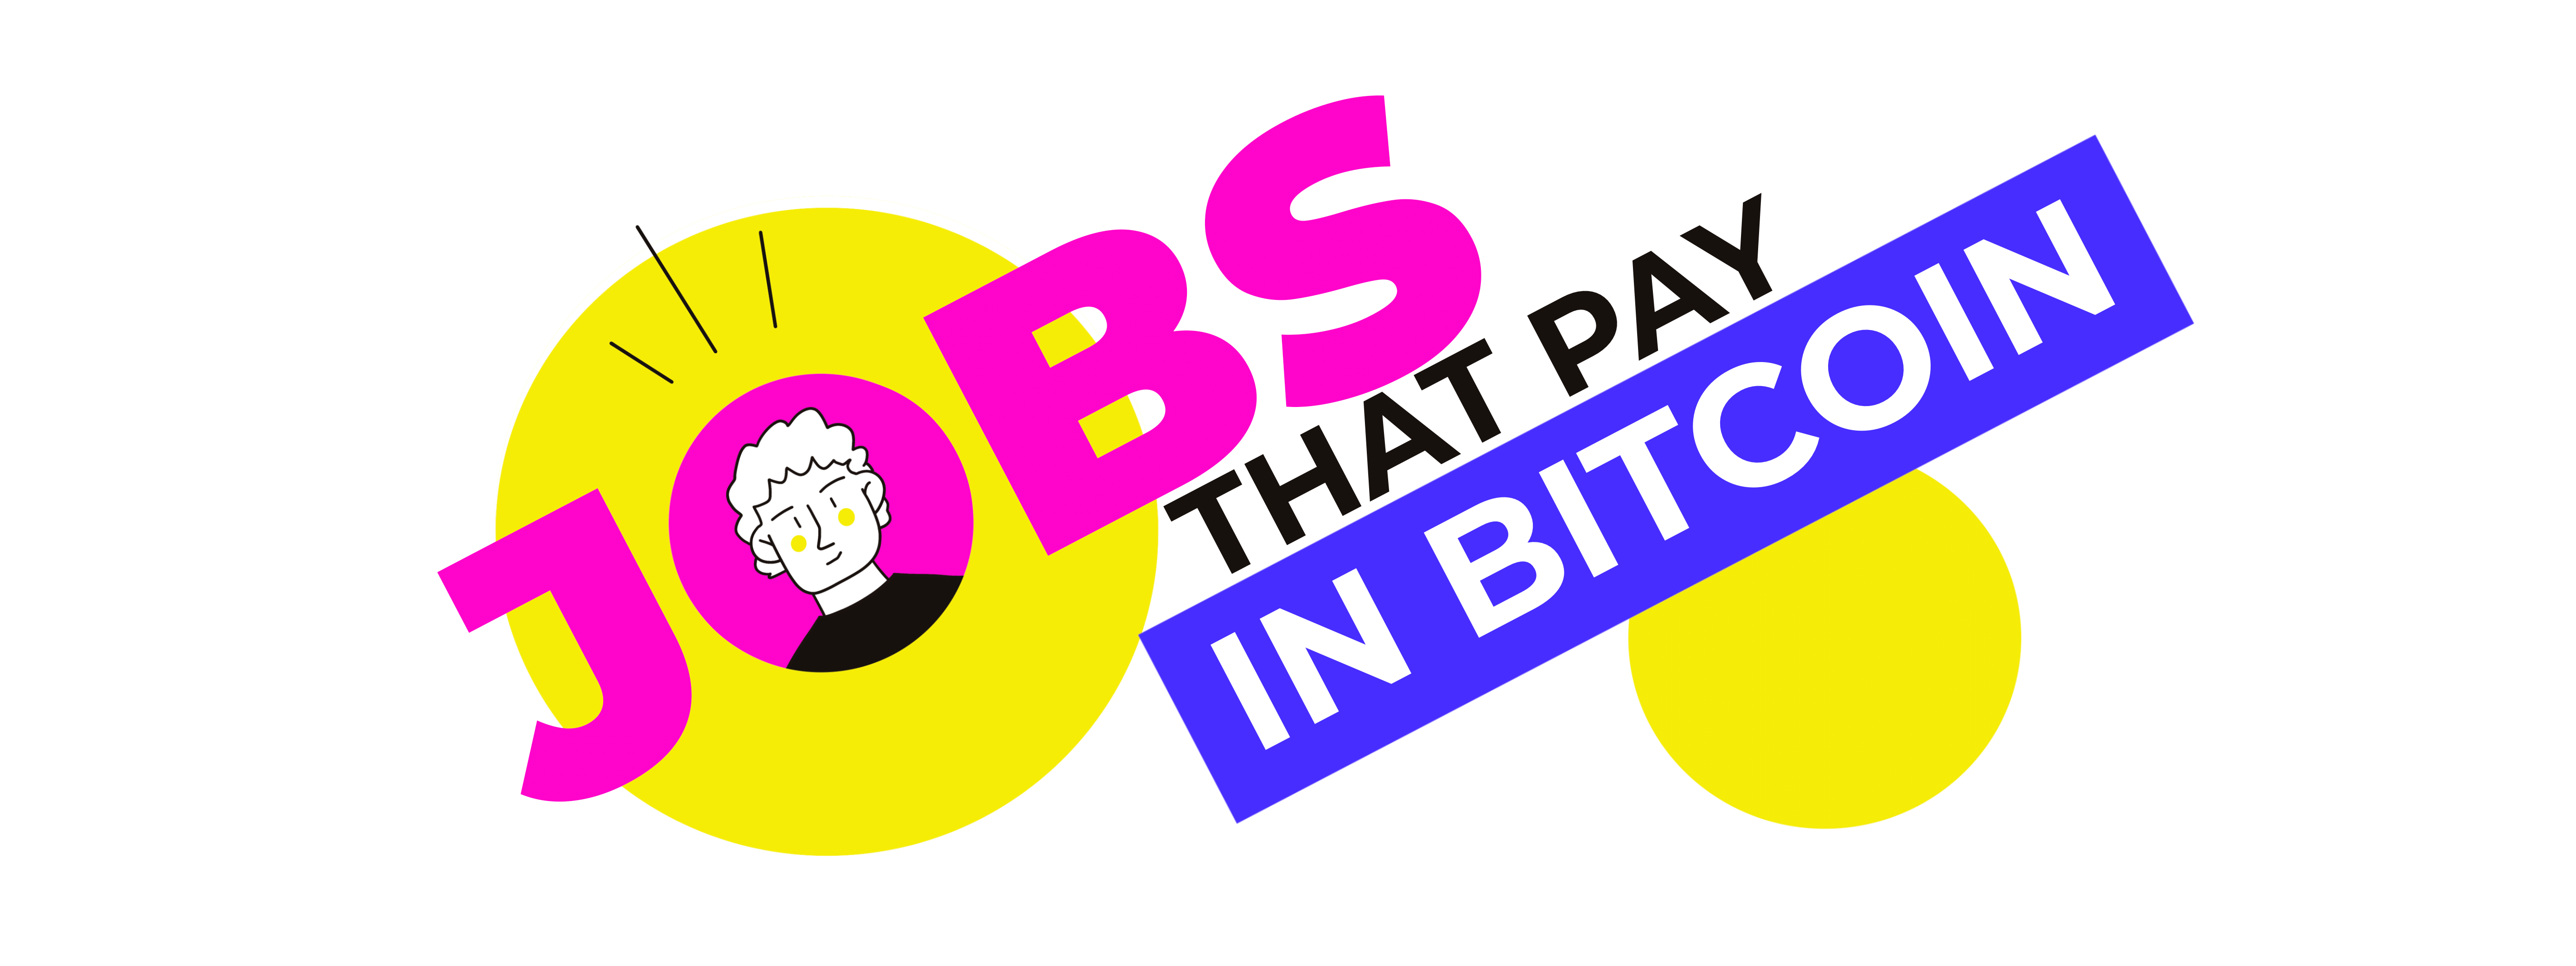 jobs that pay in bitcoin